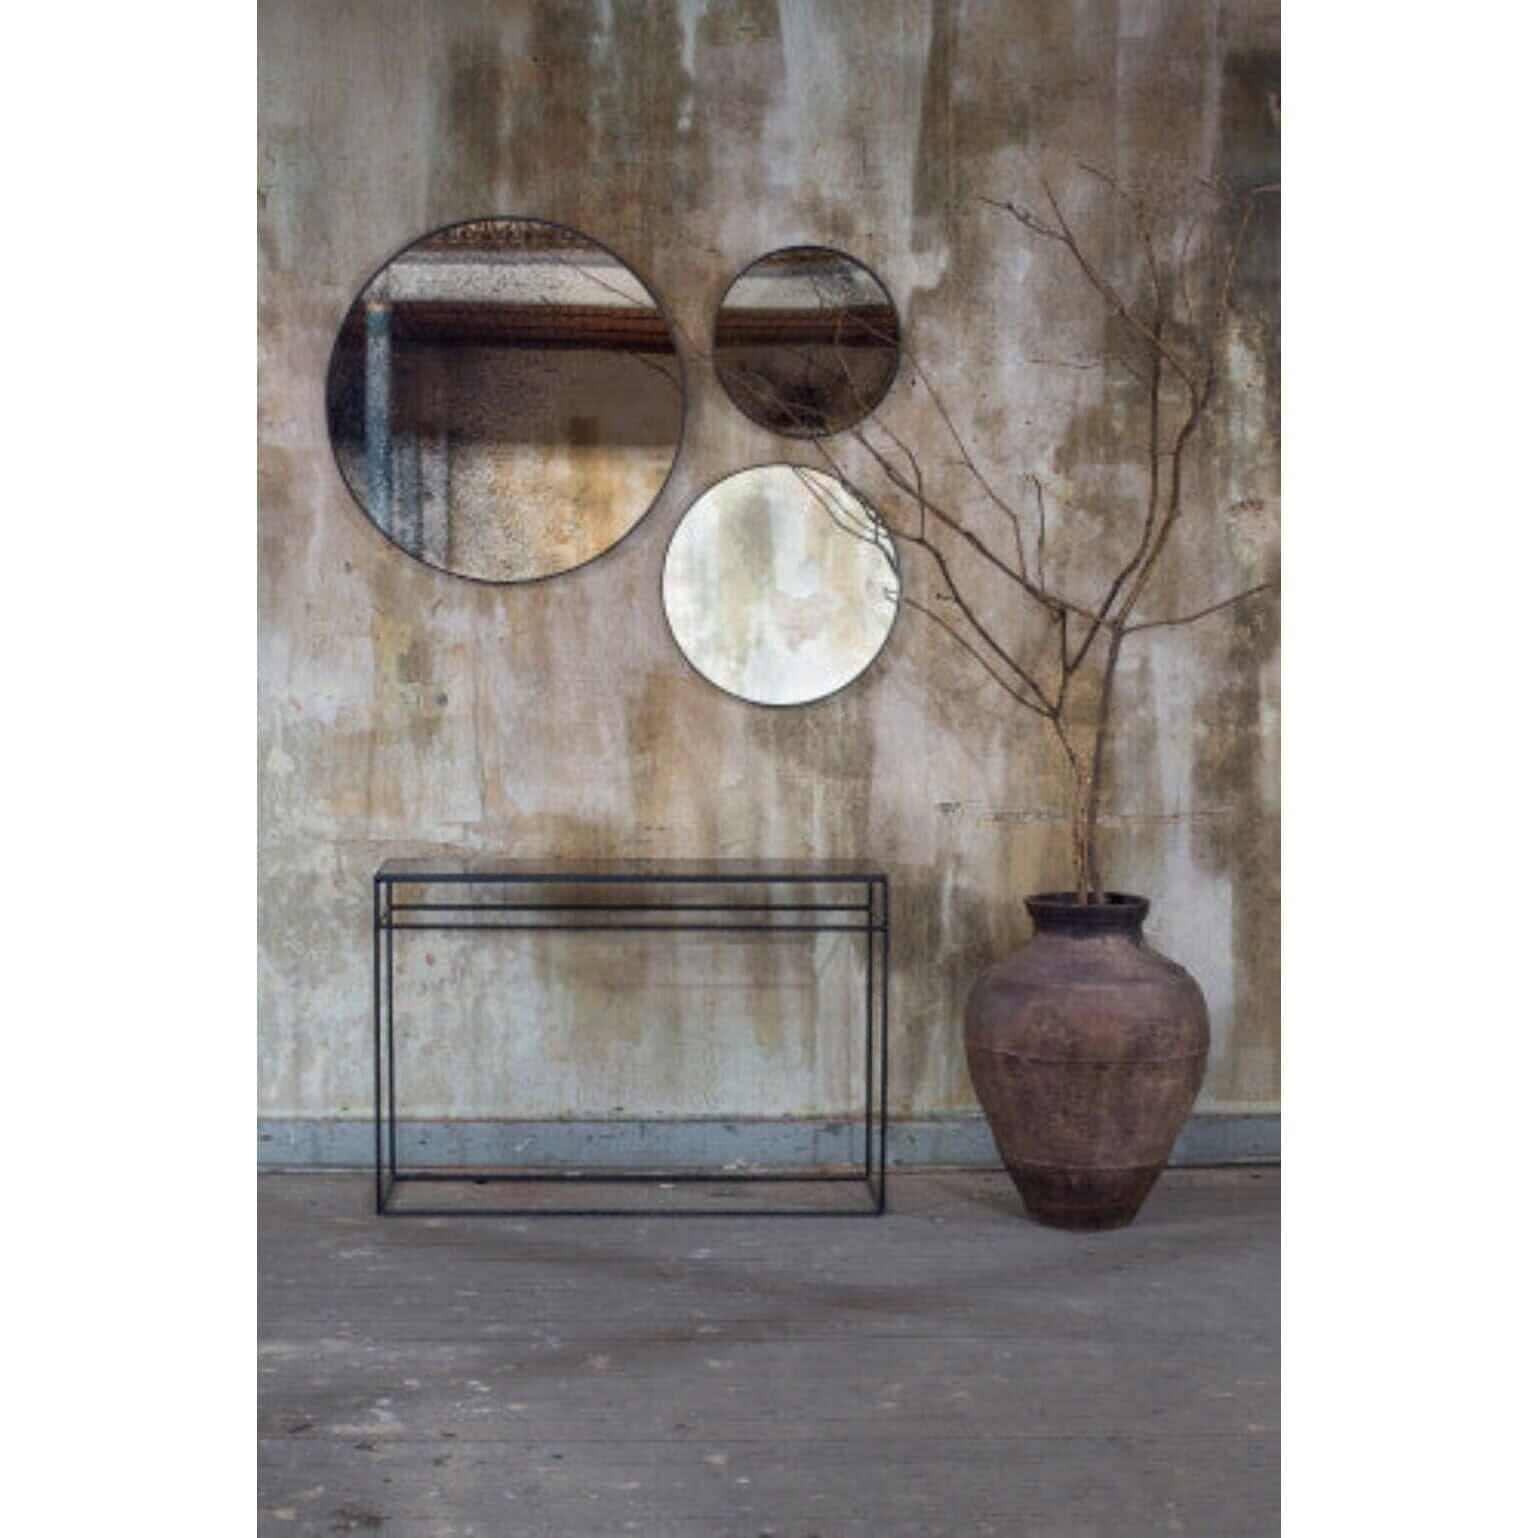 Wall Mirror - Aged Round With A Wooden Frame - 20601